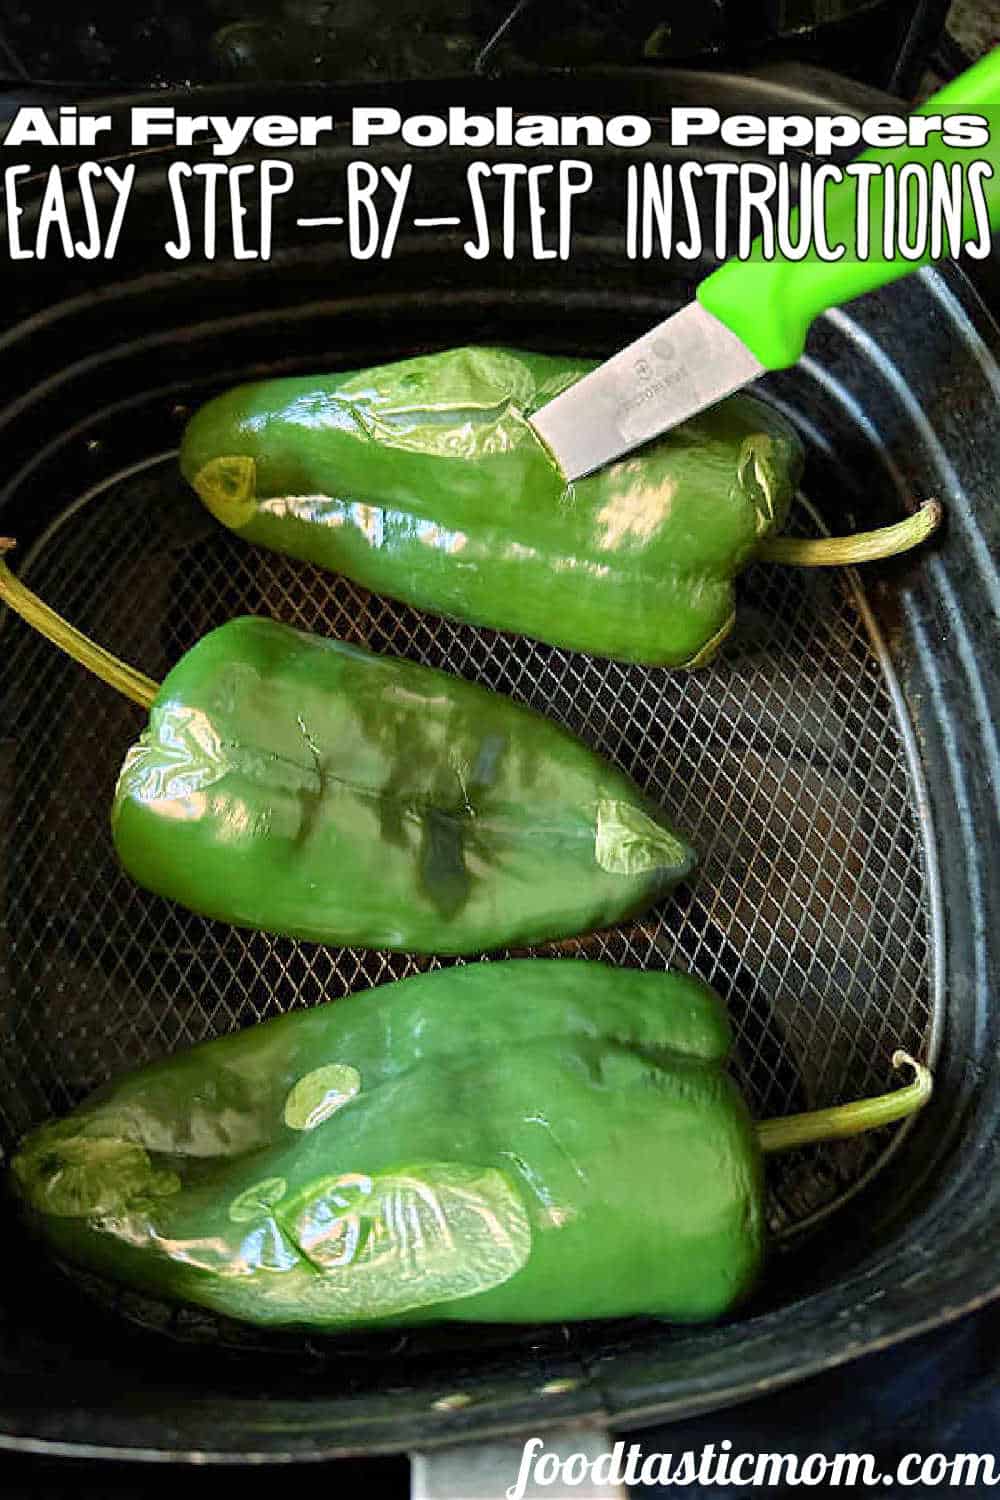 Easy step by step instructions for how to make Air Fryer Roasted Poblano Peppers. So simple to make and no oil required.